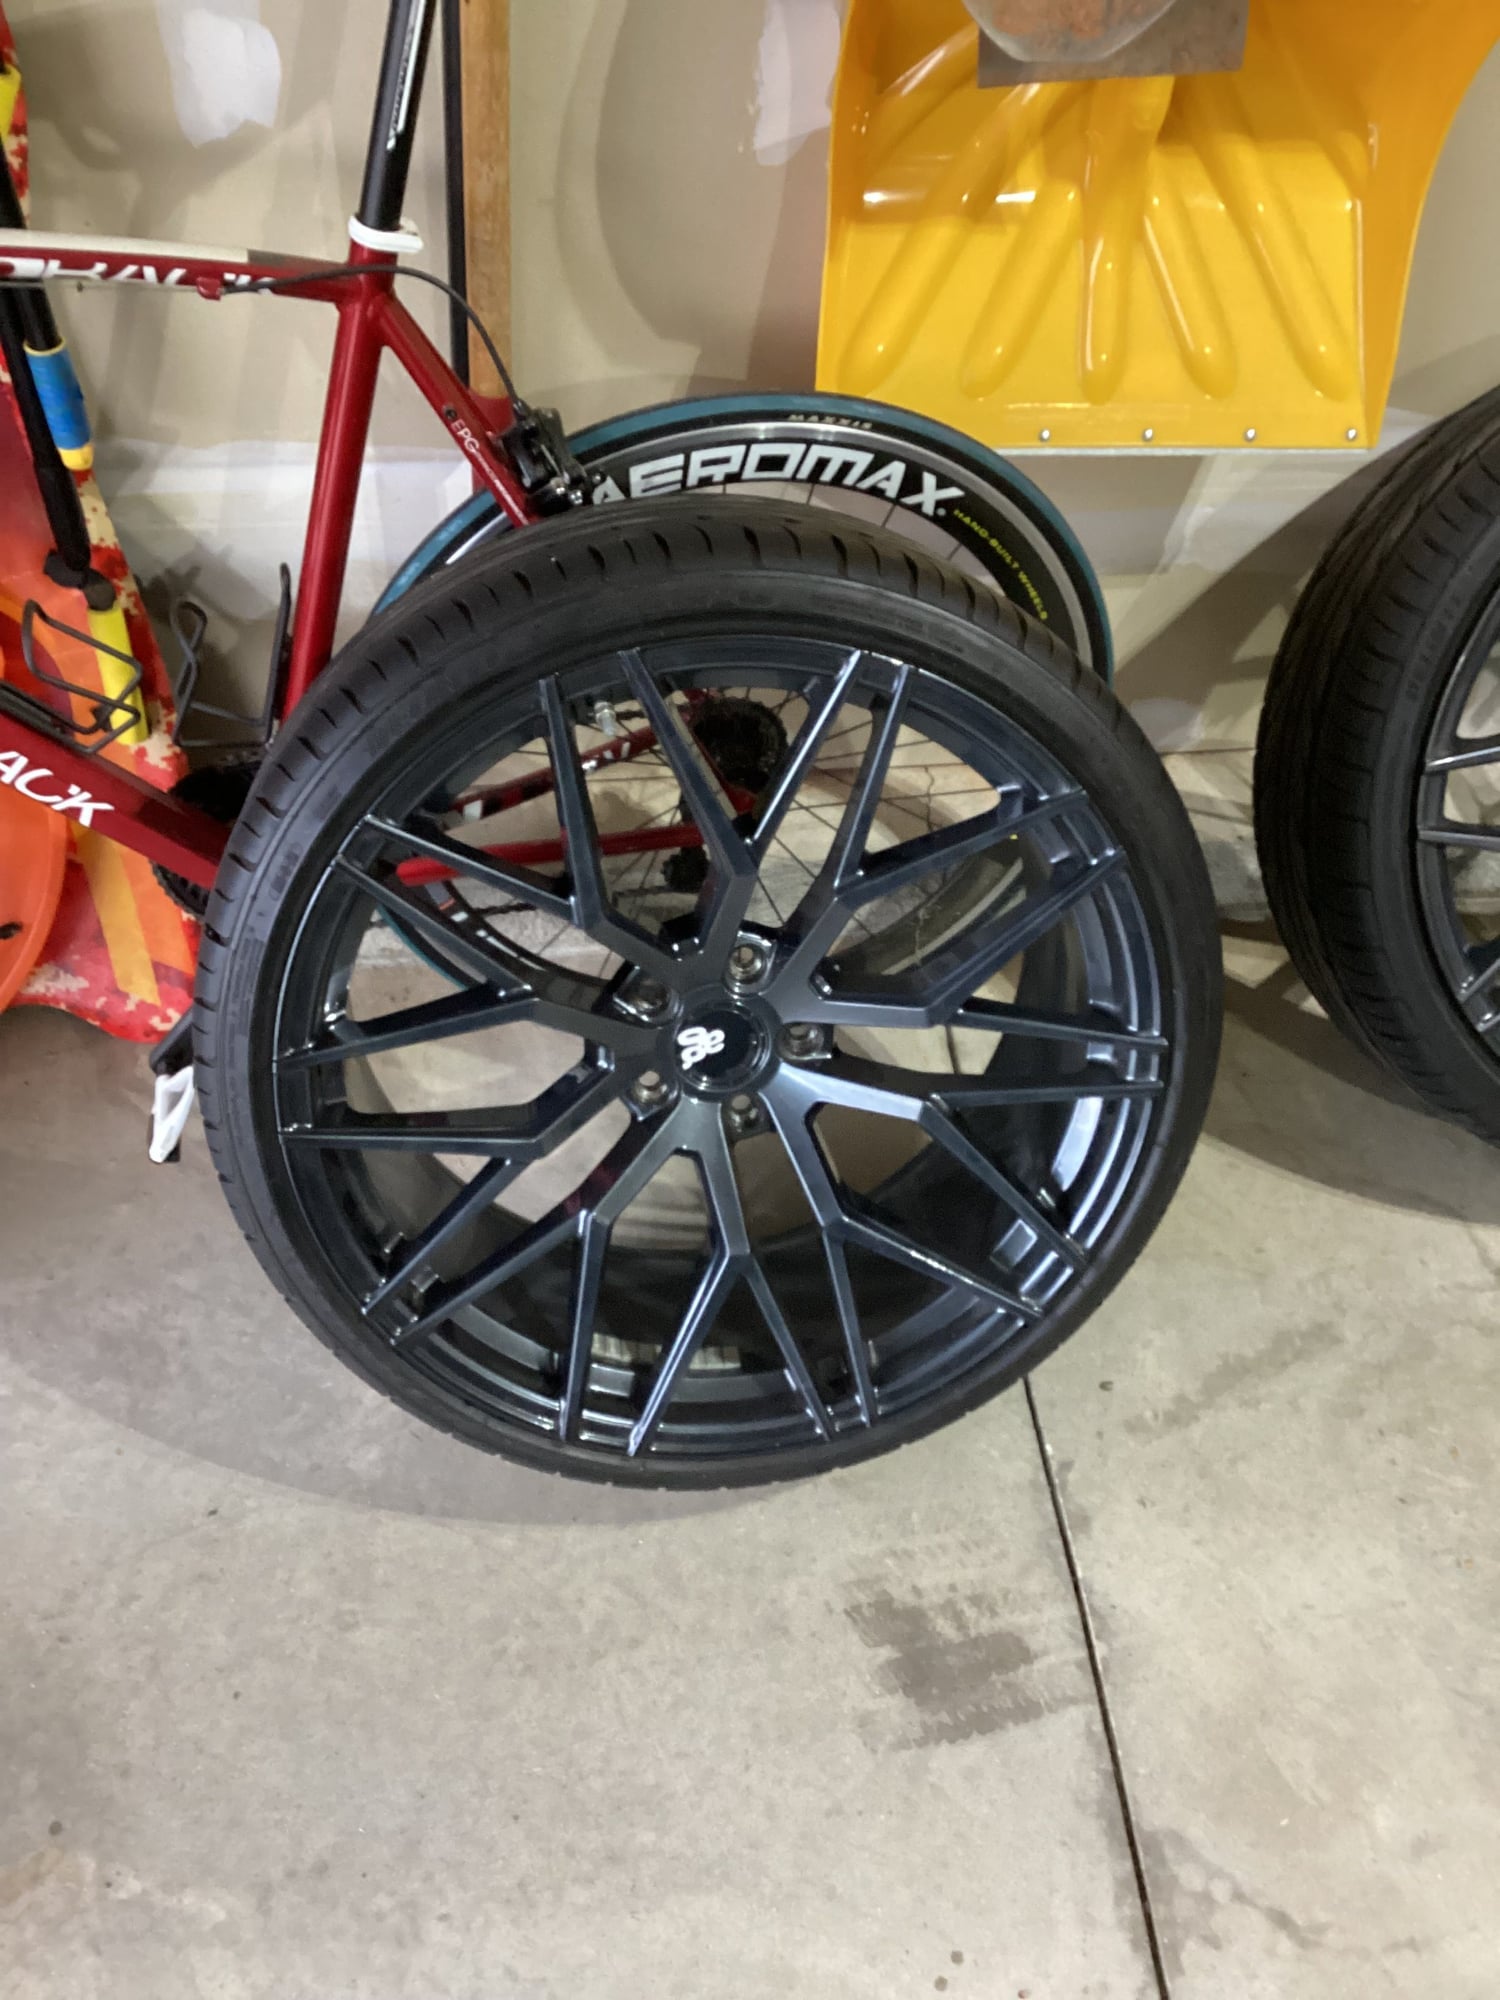 Wheels and Tires/Axles - FS: 22” 5X120 AG M520R wheels/tires Local pick up only - Used - All Years  All Models - Greer, SC 29650, United States